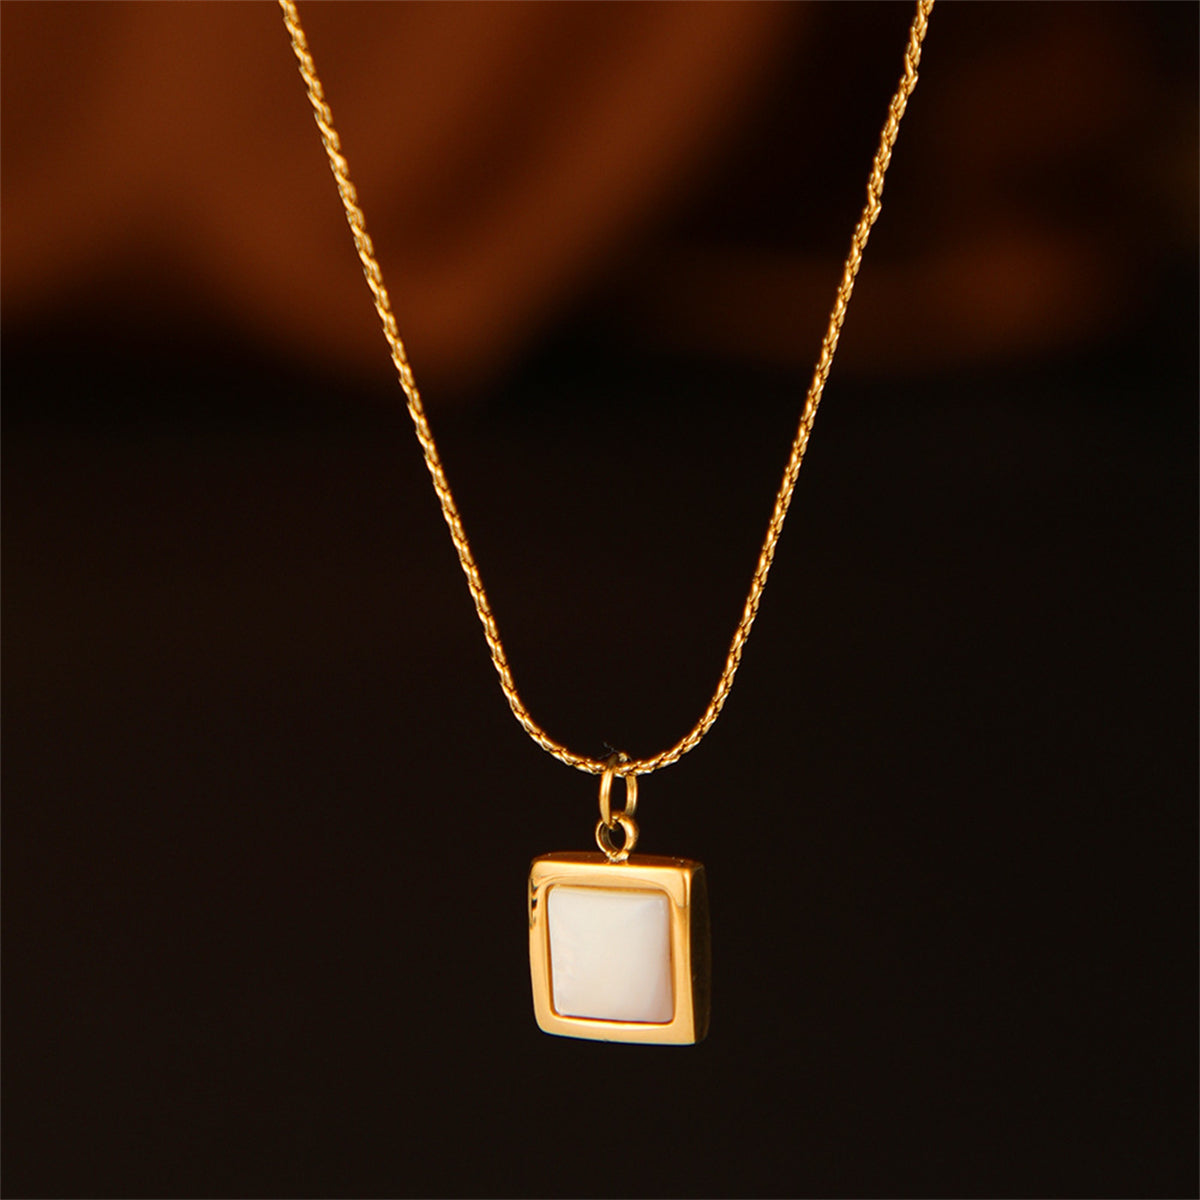 Shell & 18K Gold-Plated Square Pendant Necklace